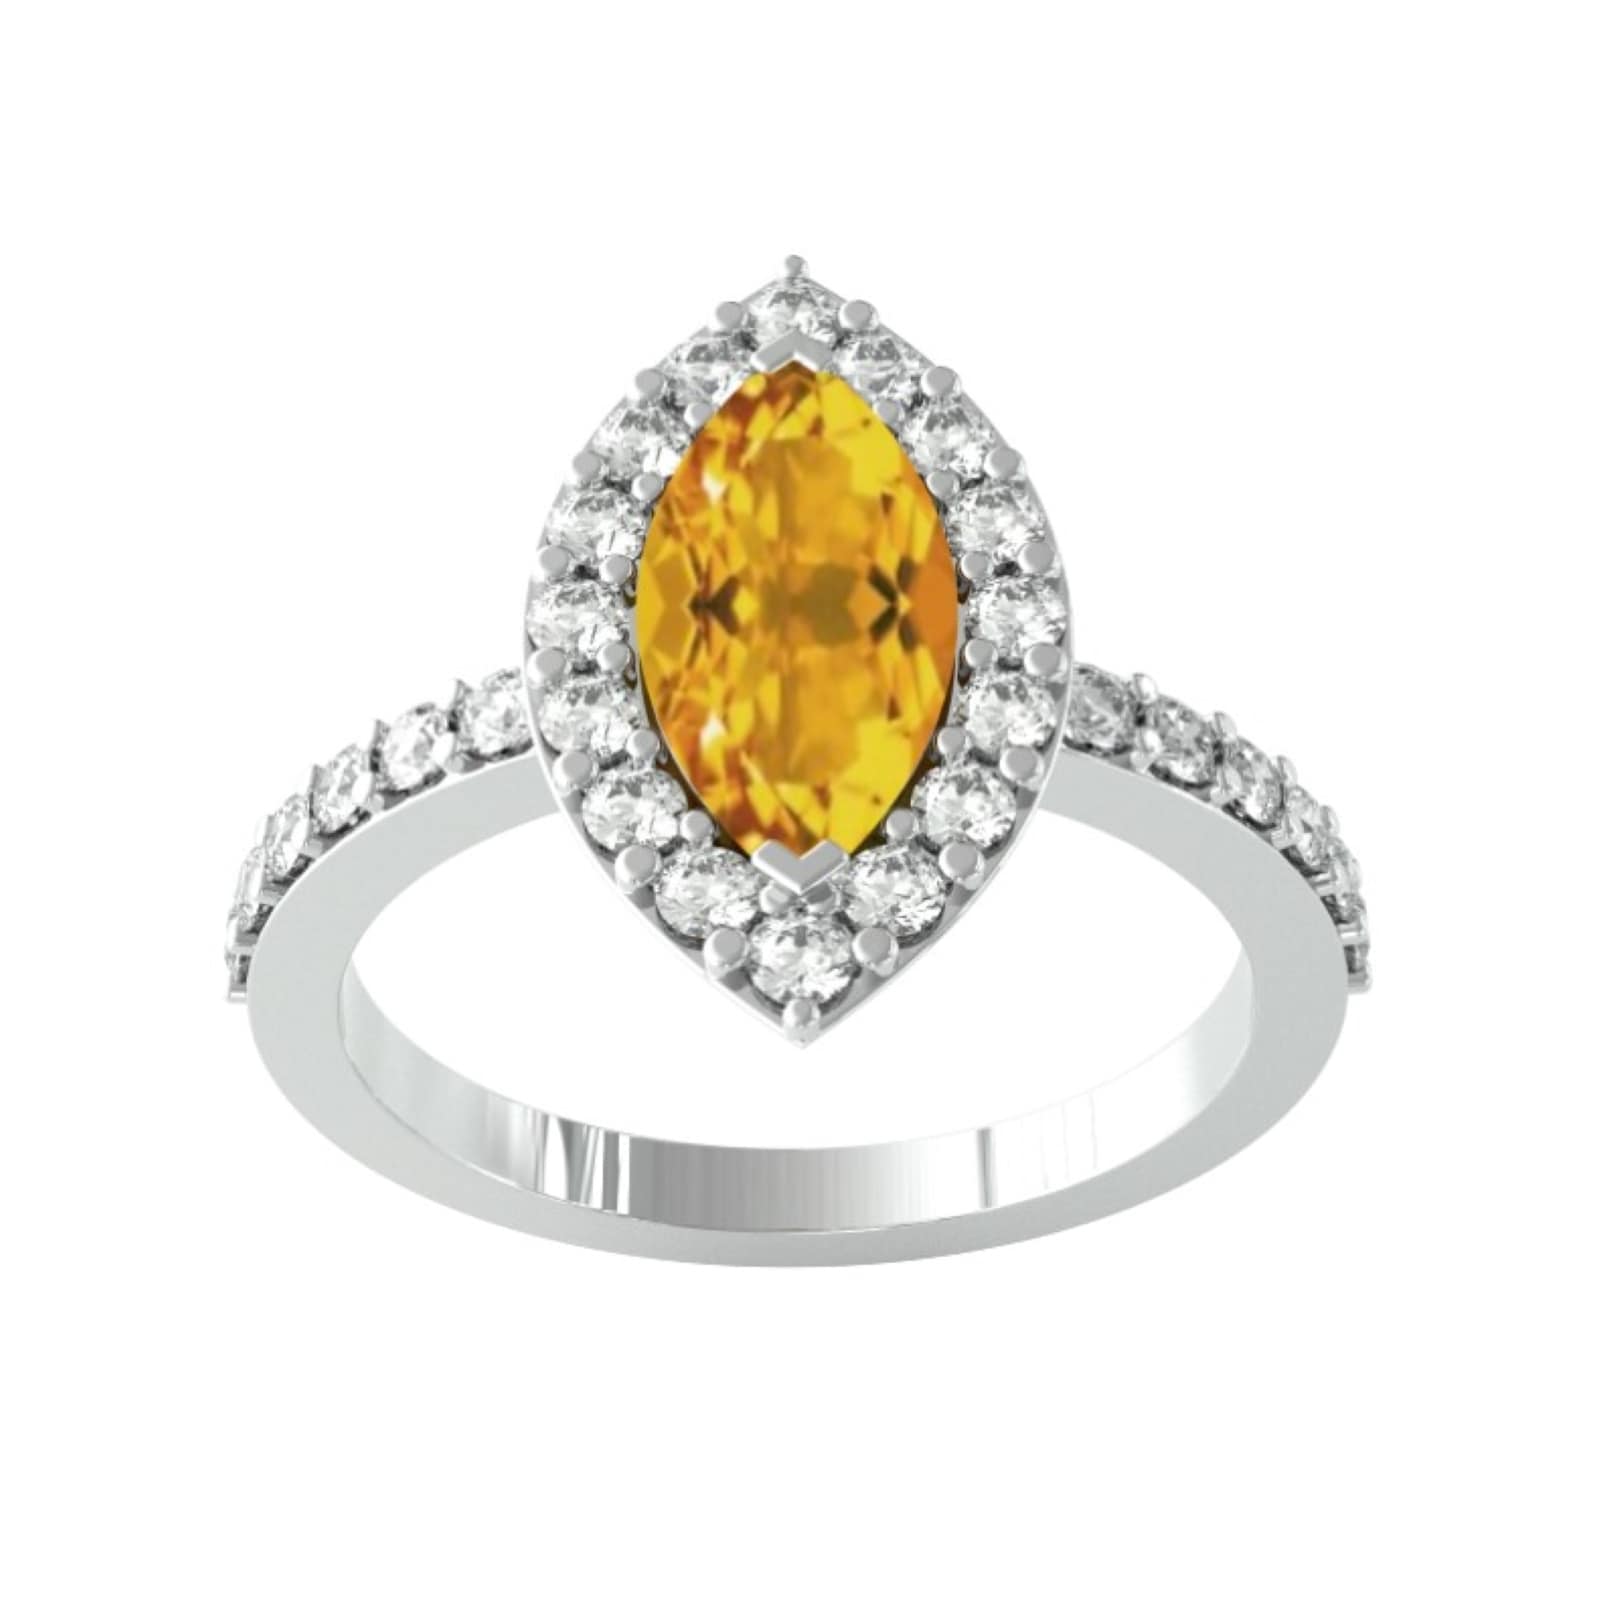 9ct White Gold Marquise Cut Citrine & Diamond Ring - Ring Size D.5